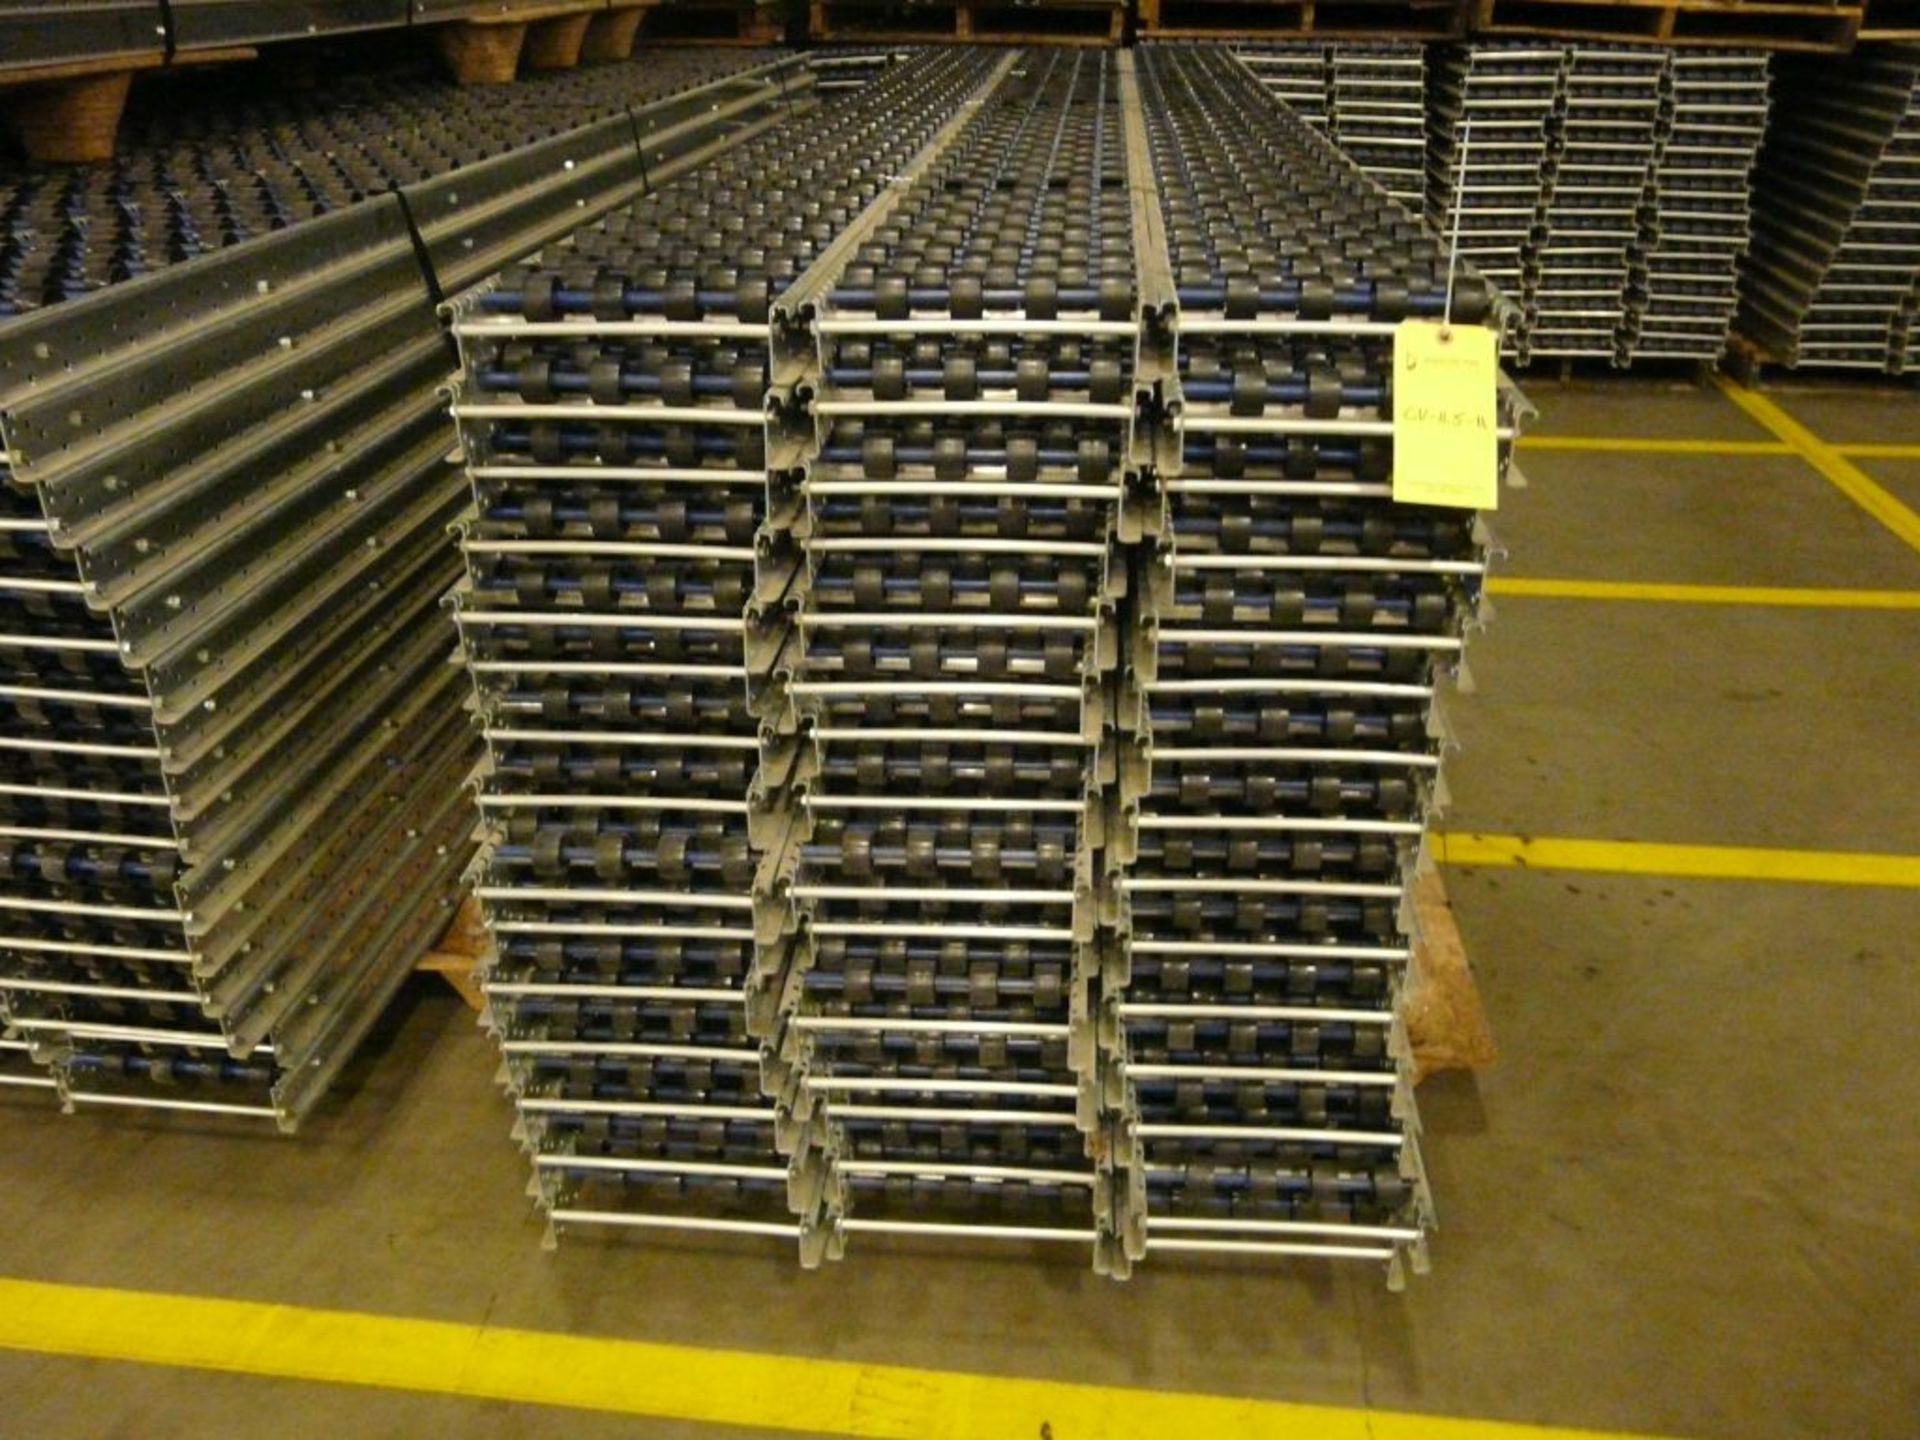 Lot of (90) SpanTrack Wheelbed Carton Flow Conveyors - 11.5'L x 11"W; Tag: 223577 - $30 Lot - Image 2 of 4